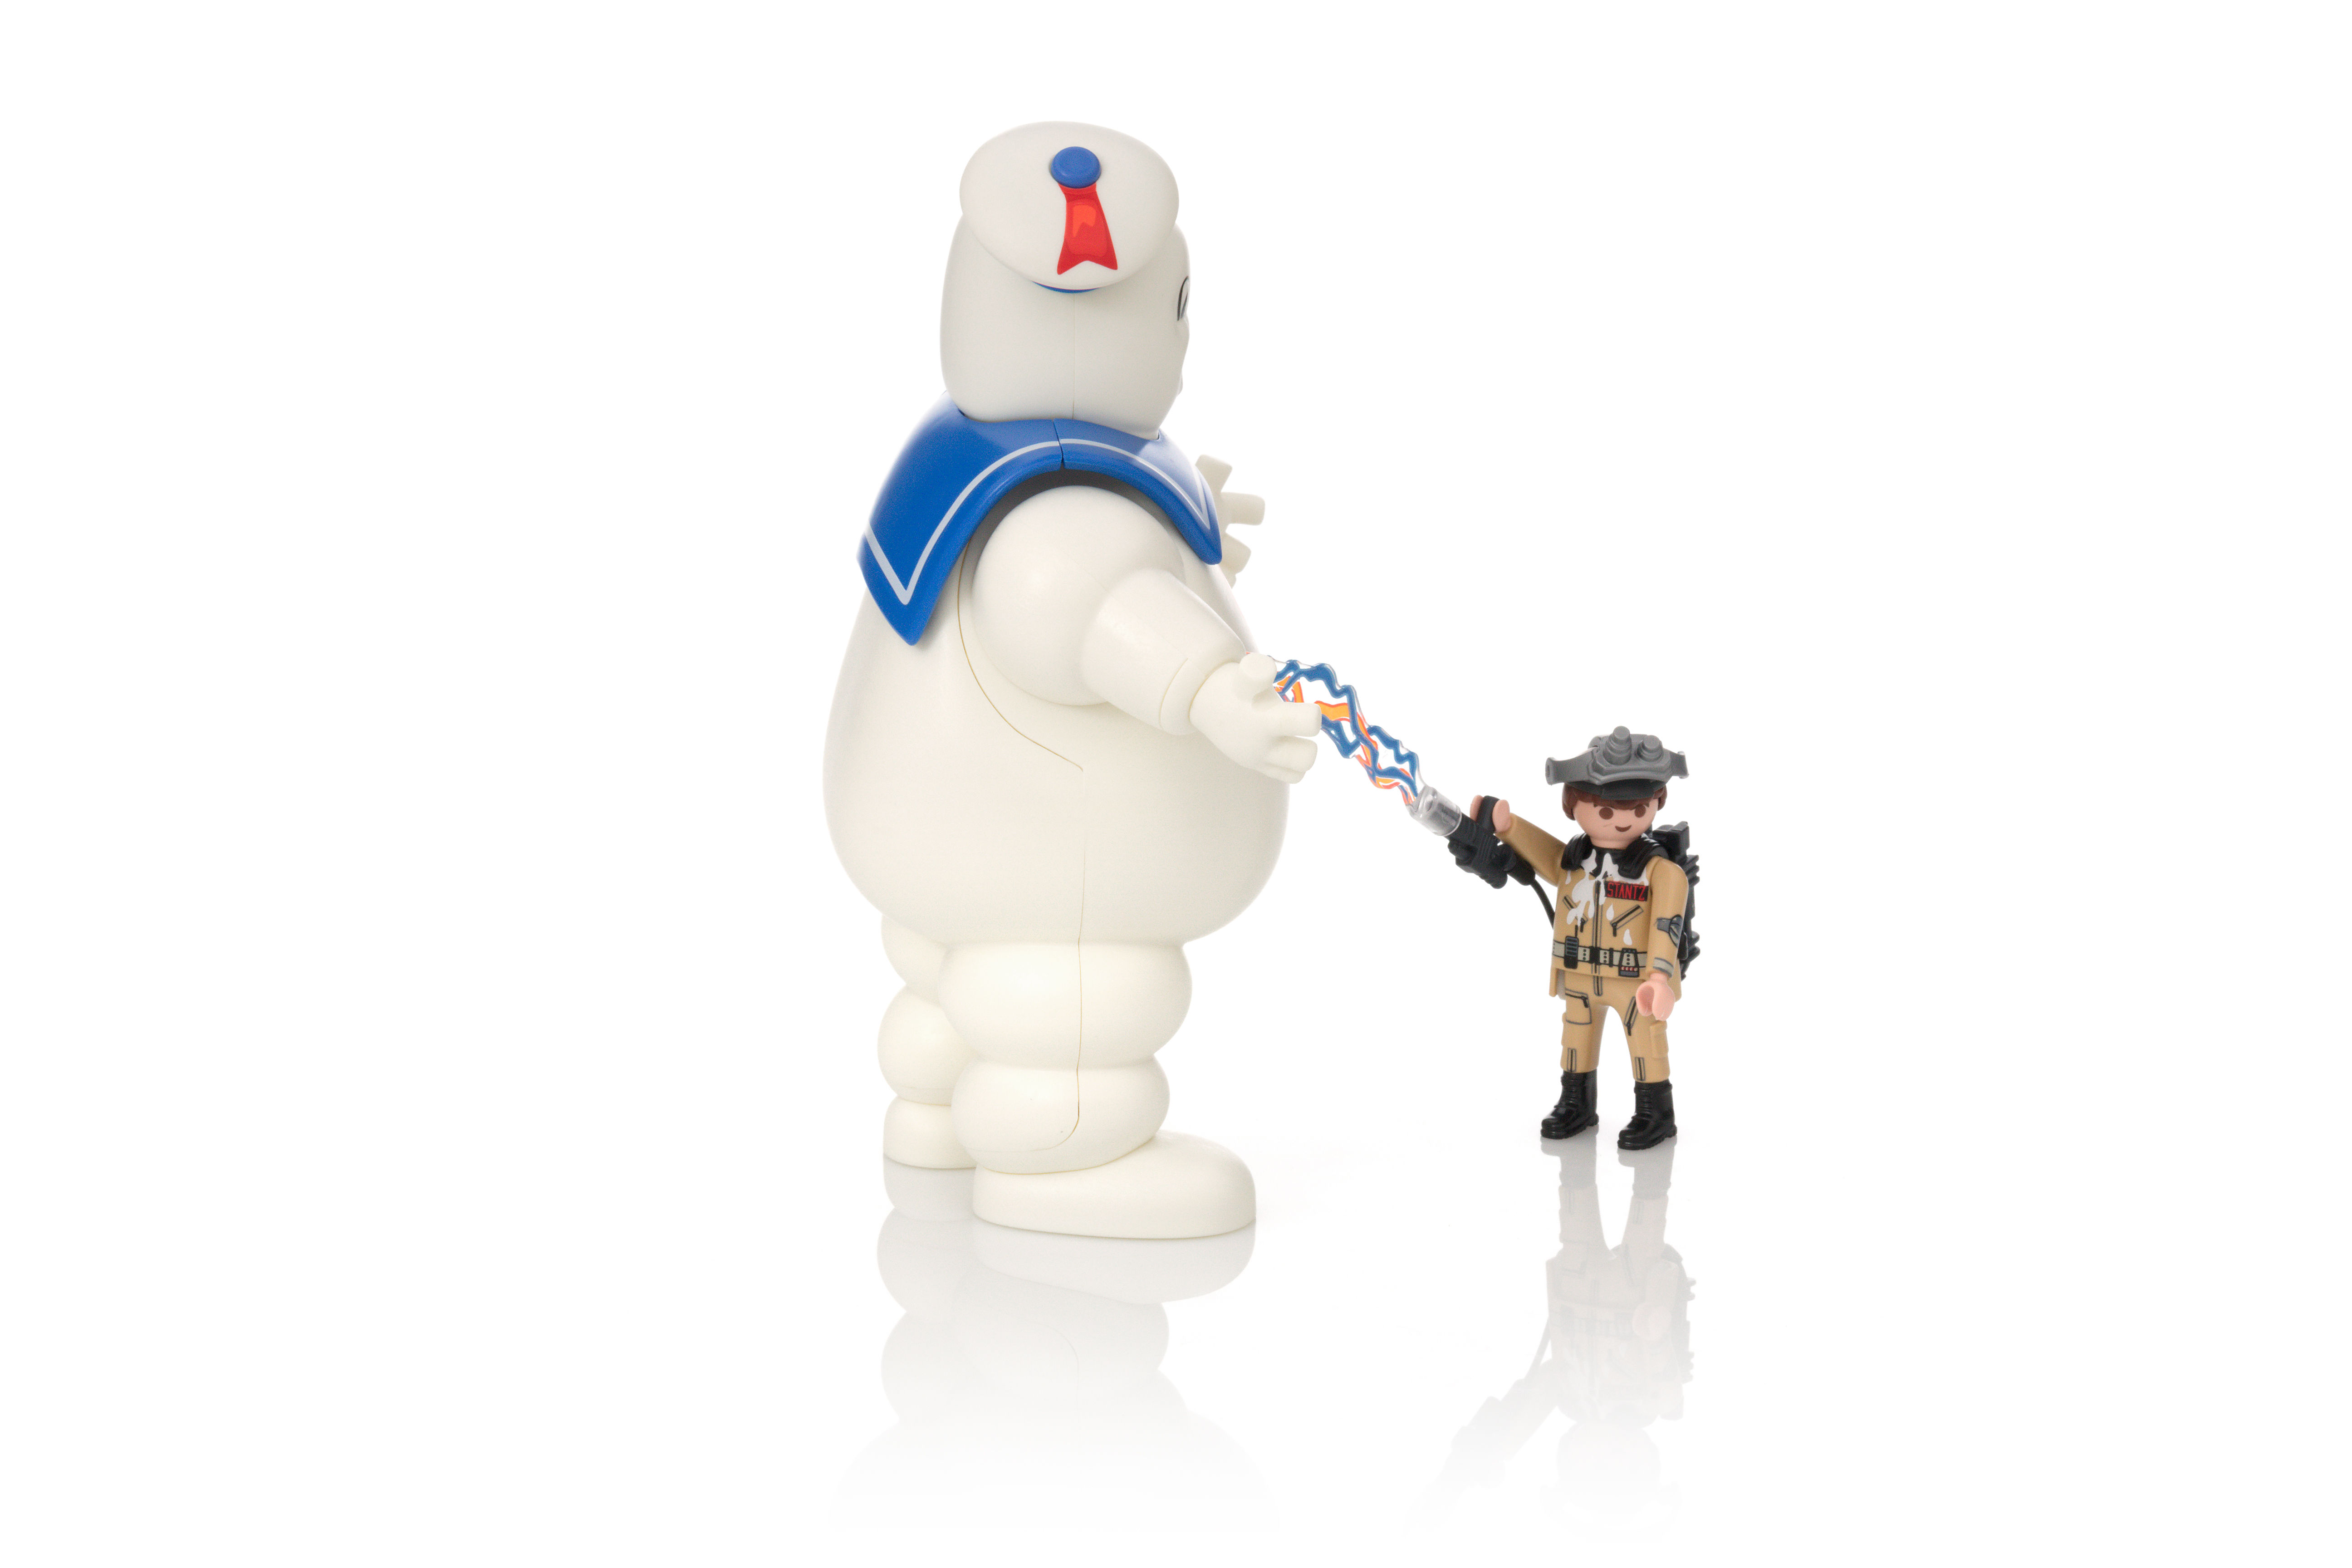 Playmobil Ghostbusters Stay Puft Marshmallow Man Building Set 9221, 1 Unit  - Kroger